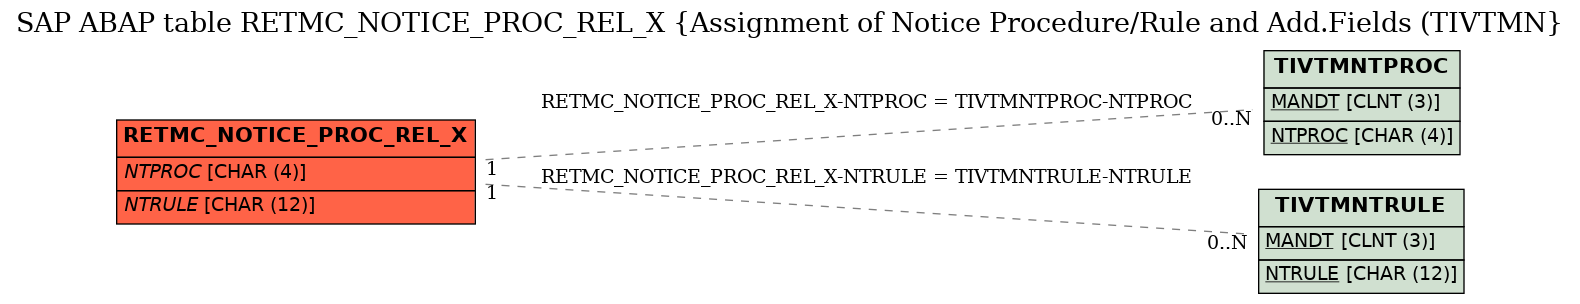 E-R Diagram for table RETMC_NOTICE_PROC_REL_X (Assignment of Notice Procedure/Rule and Add.Fields (TIVTMN)